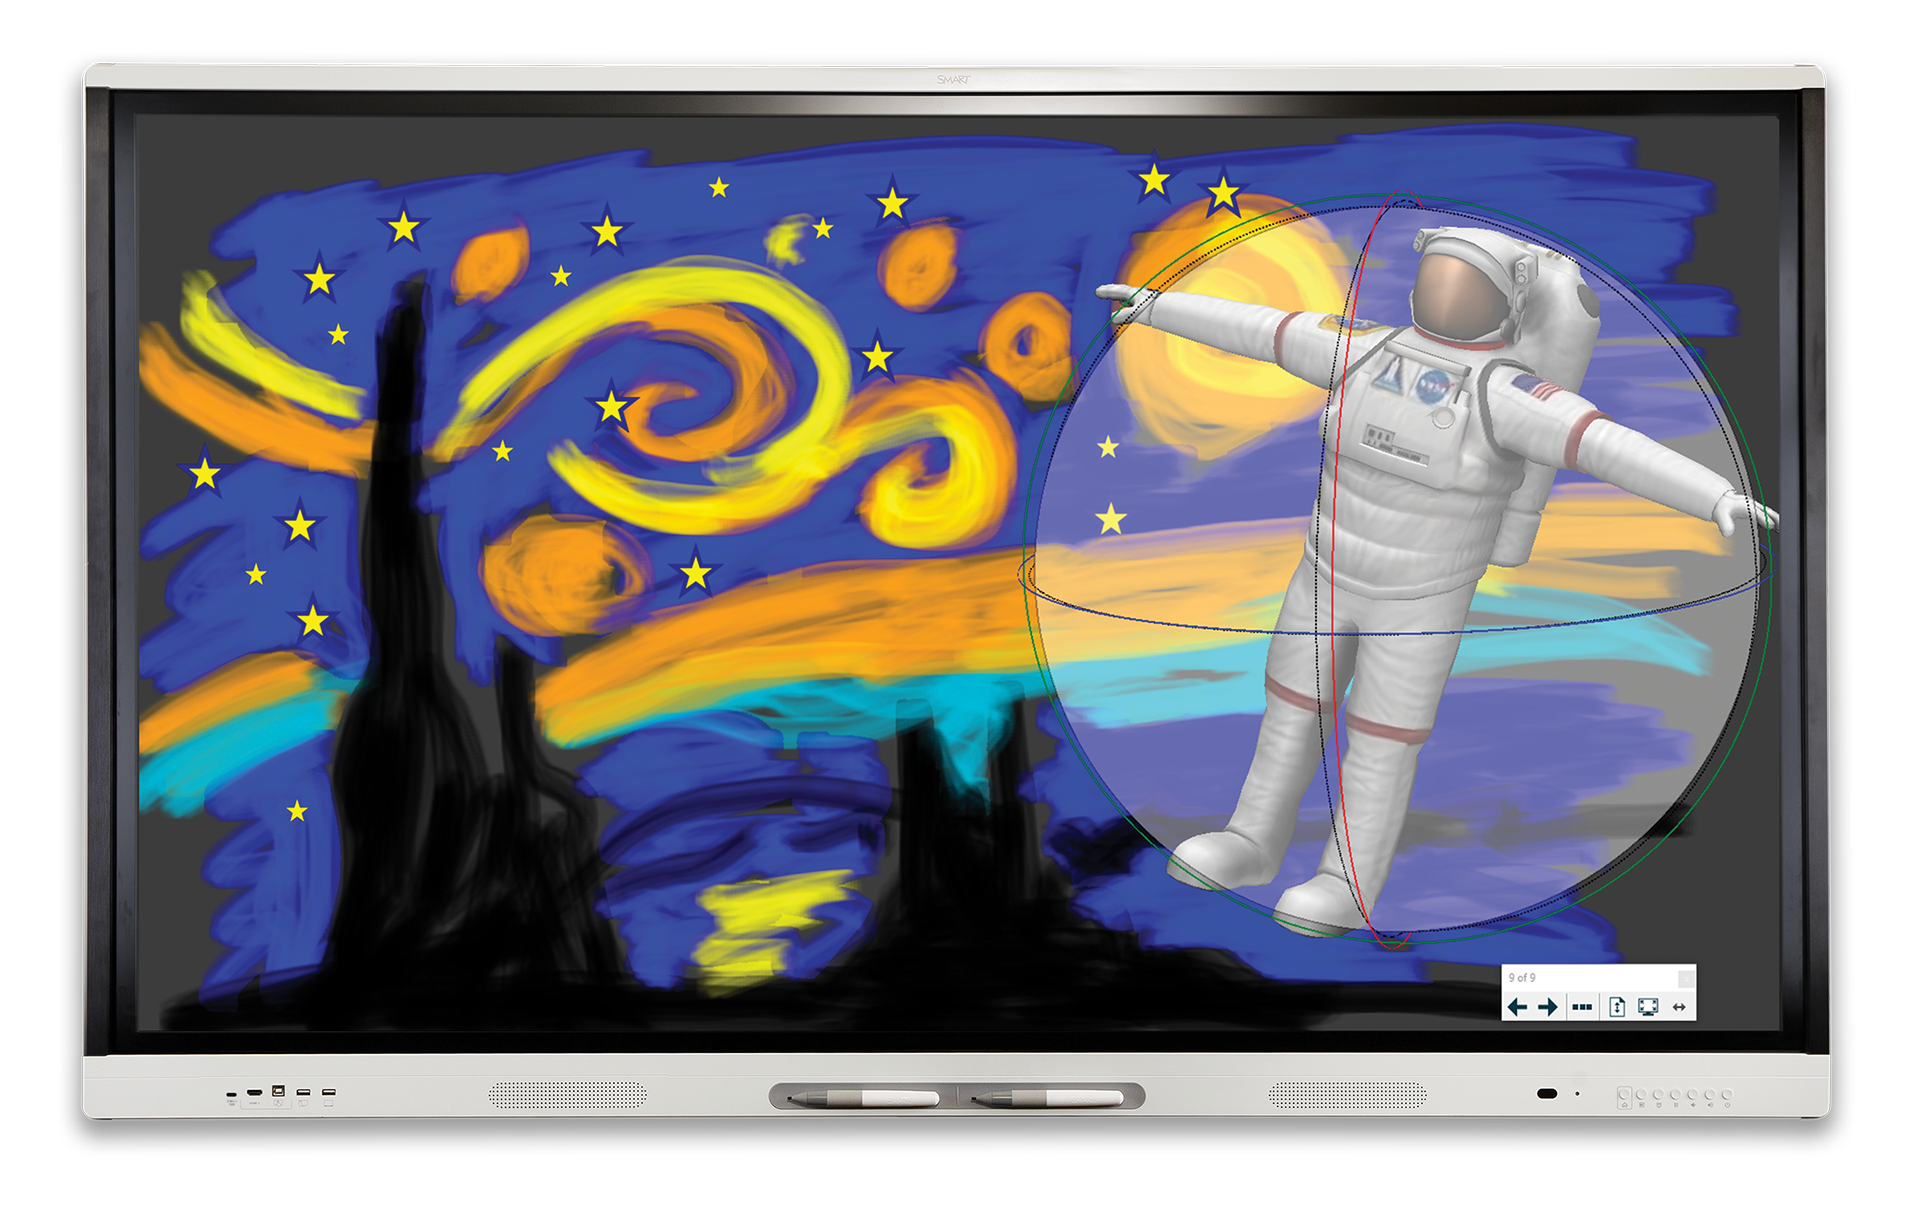 Digital illustration of an astronaut floating in space with stars and swirls on an interactive SMART Board.